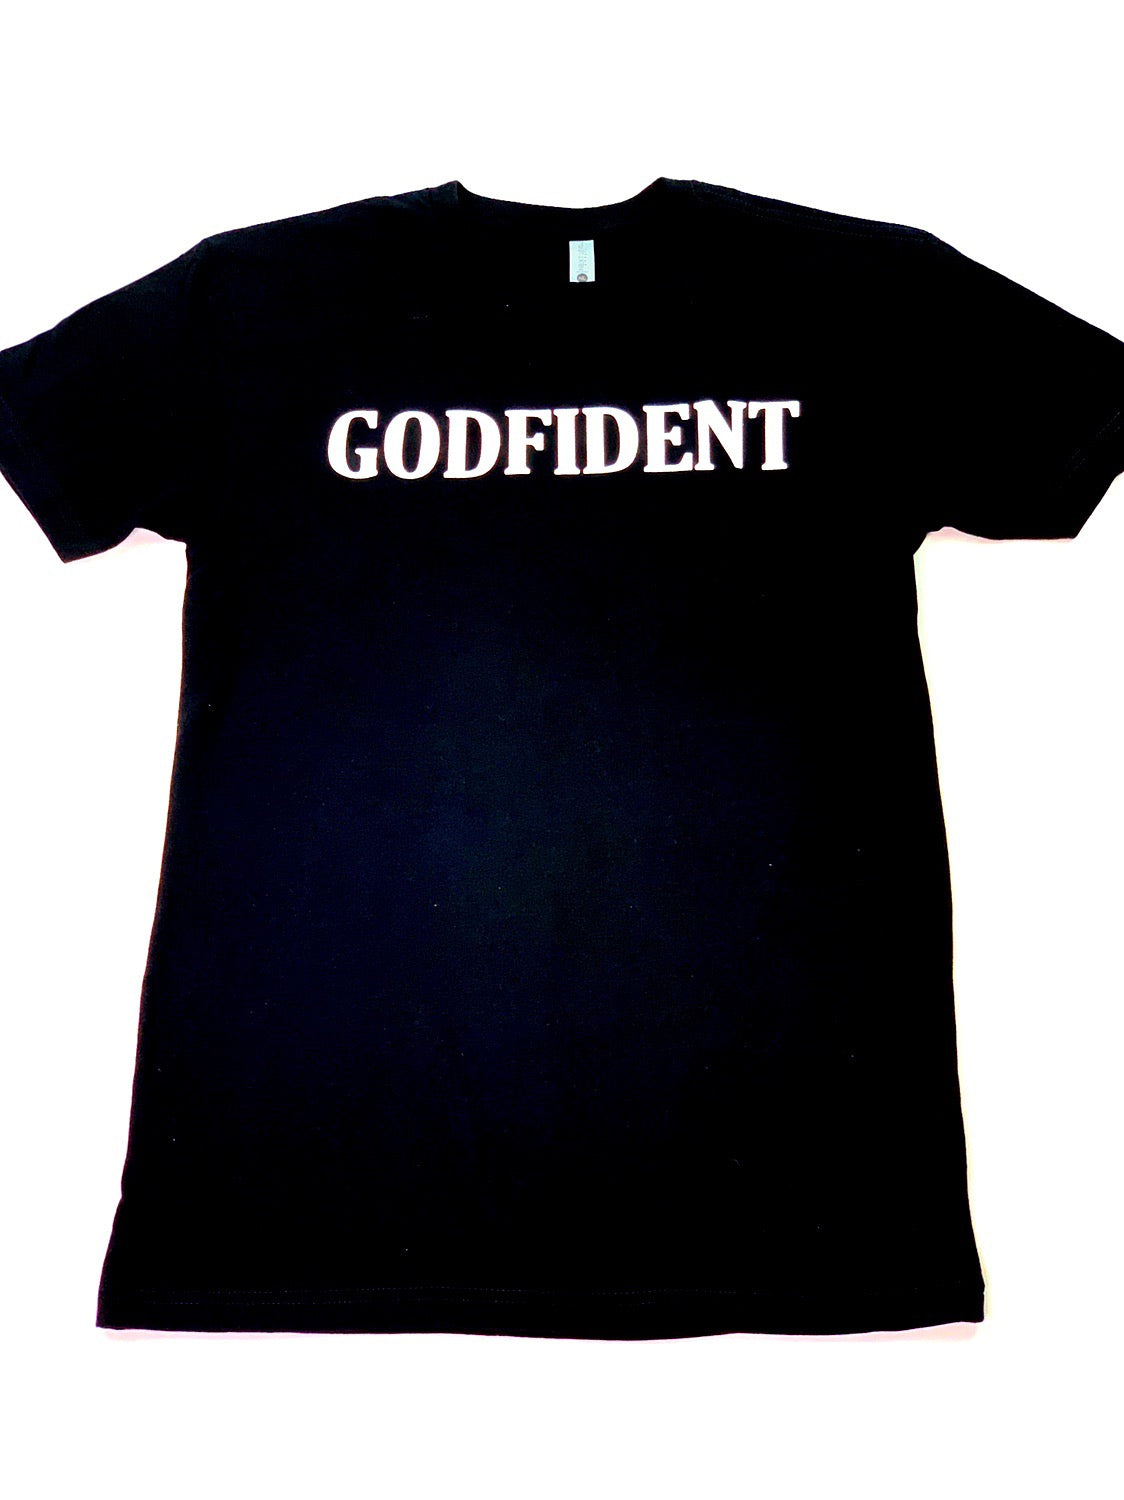 GODFIDENT T-Shirt - Jewellery Unique Gifts & Accessories